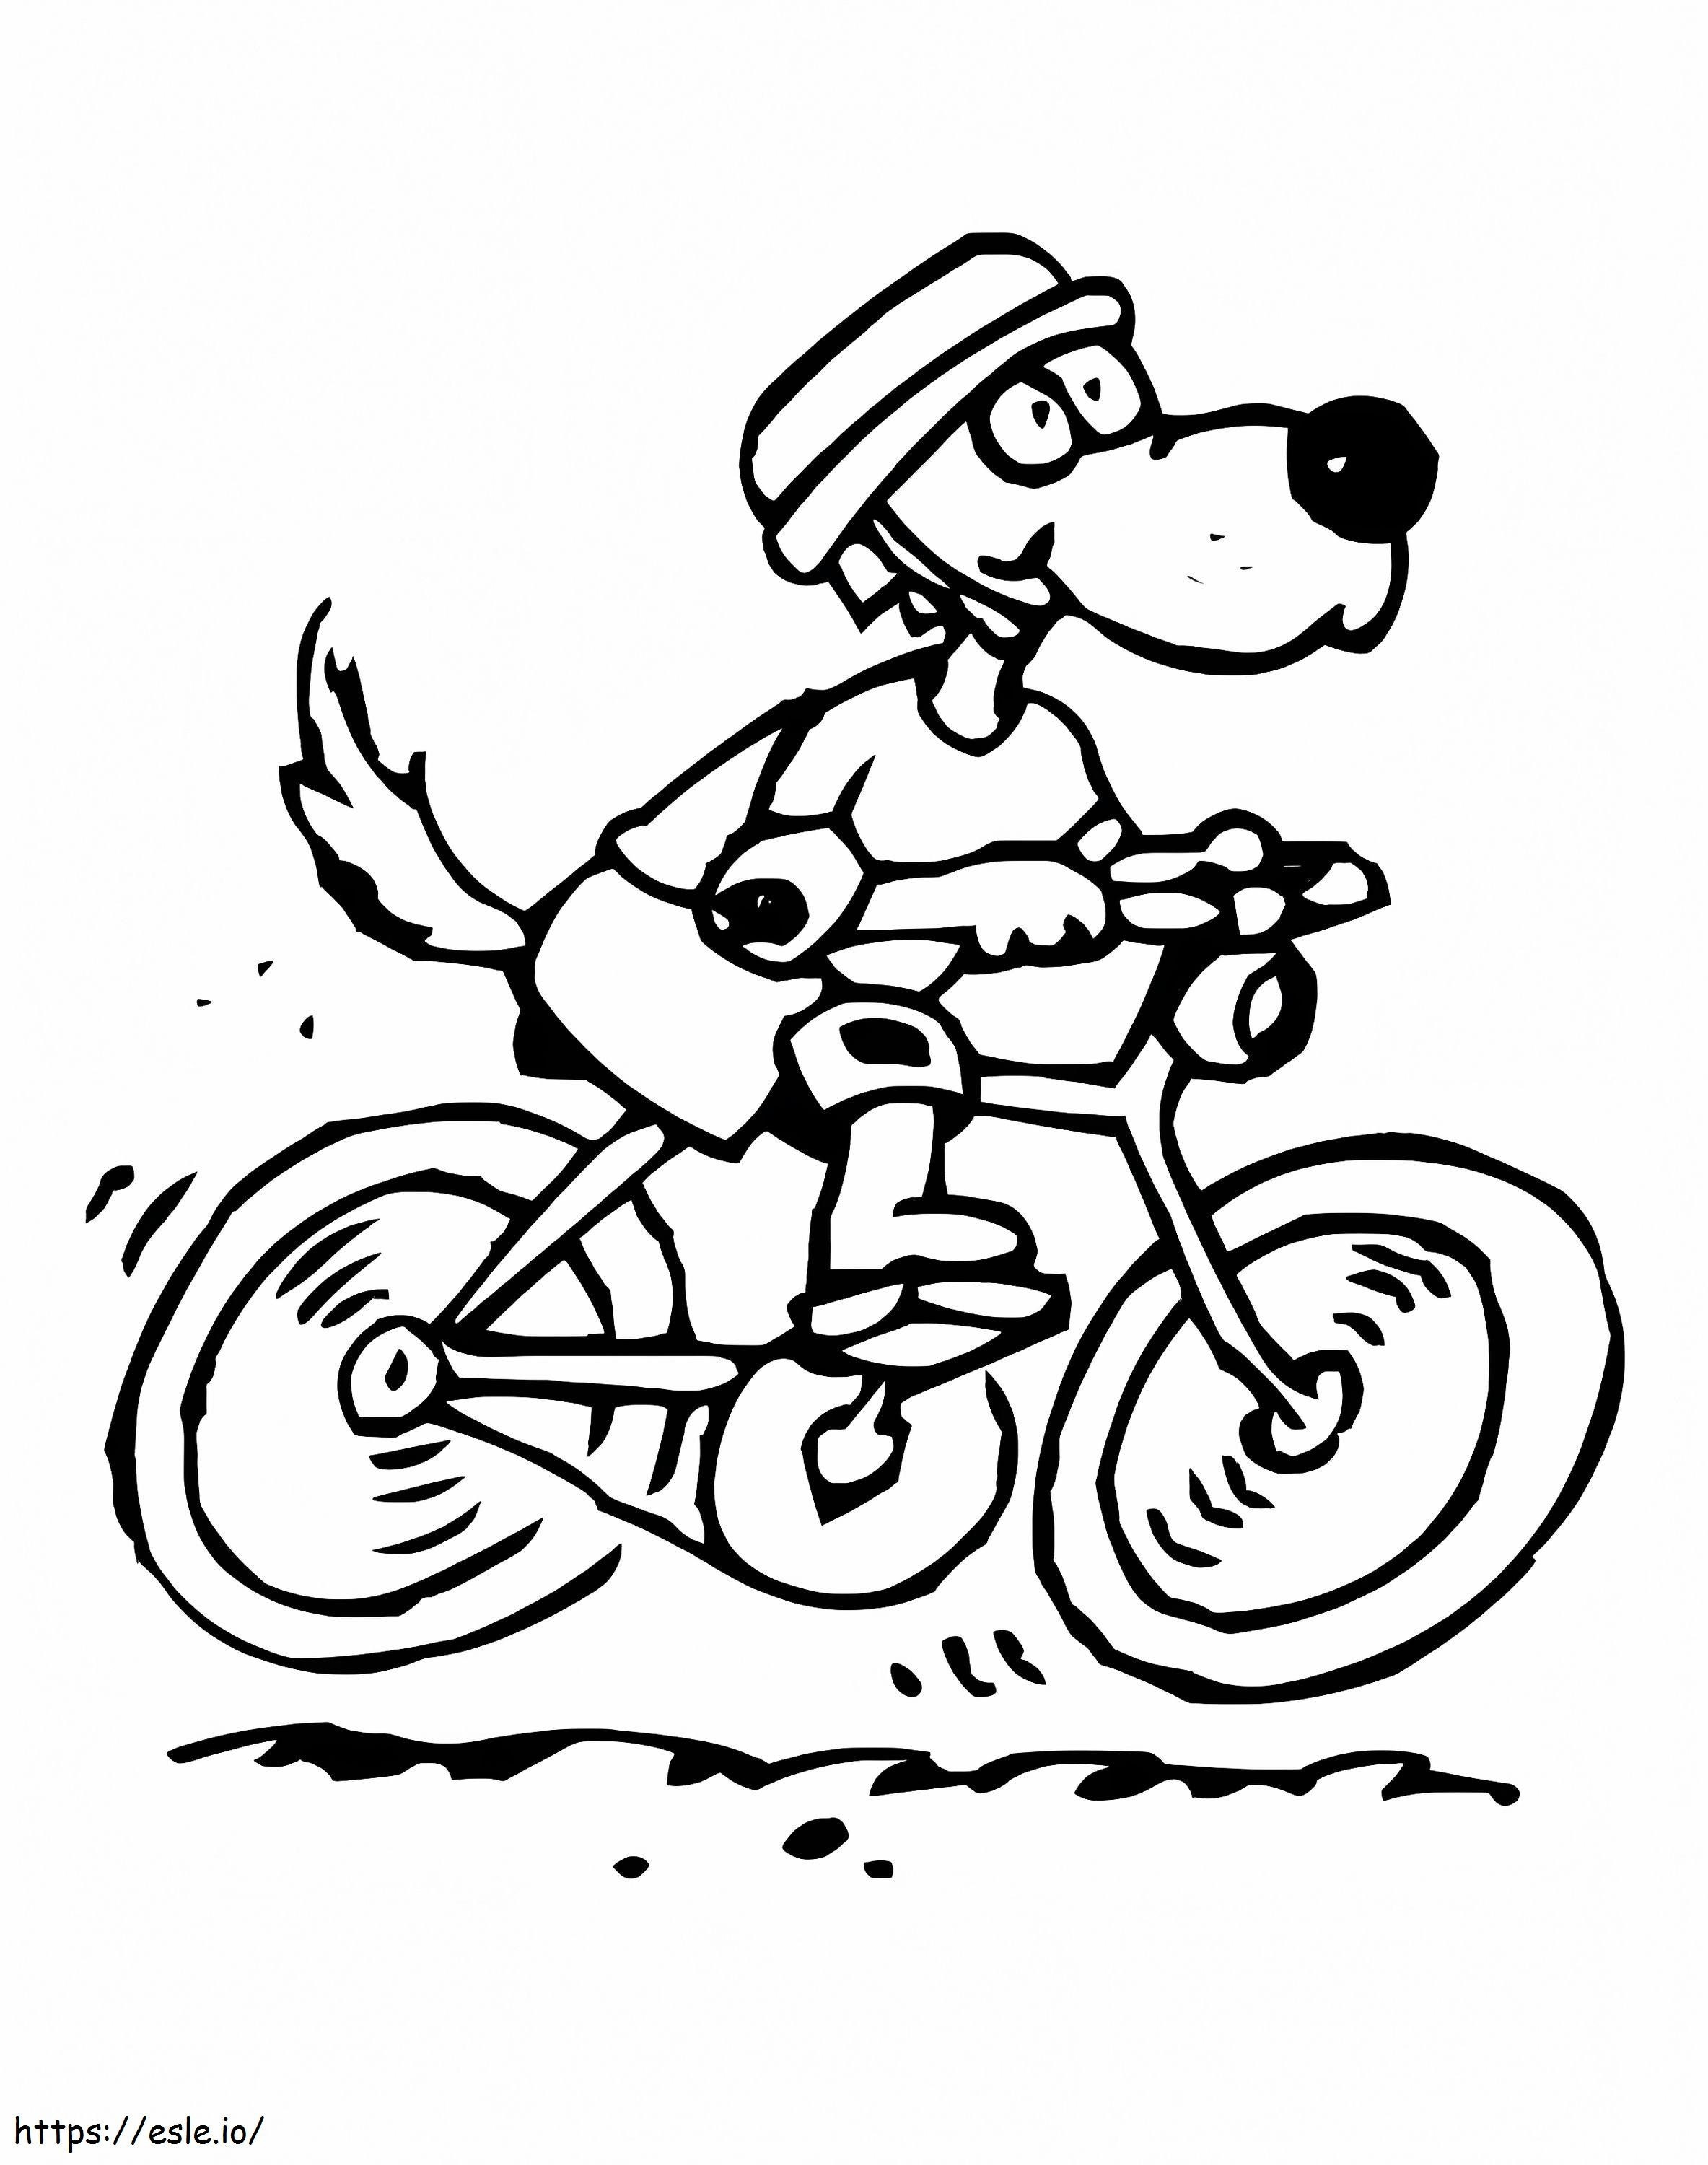 Dog On A Bicycle coloring page